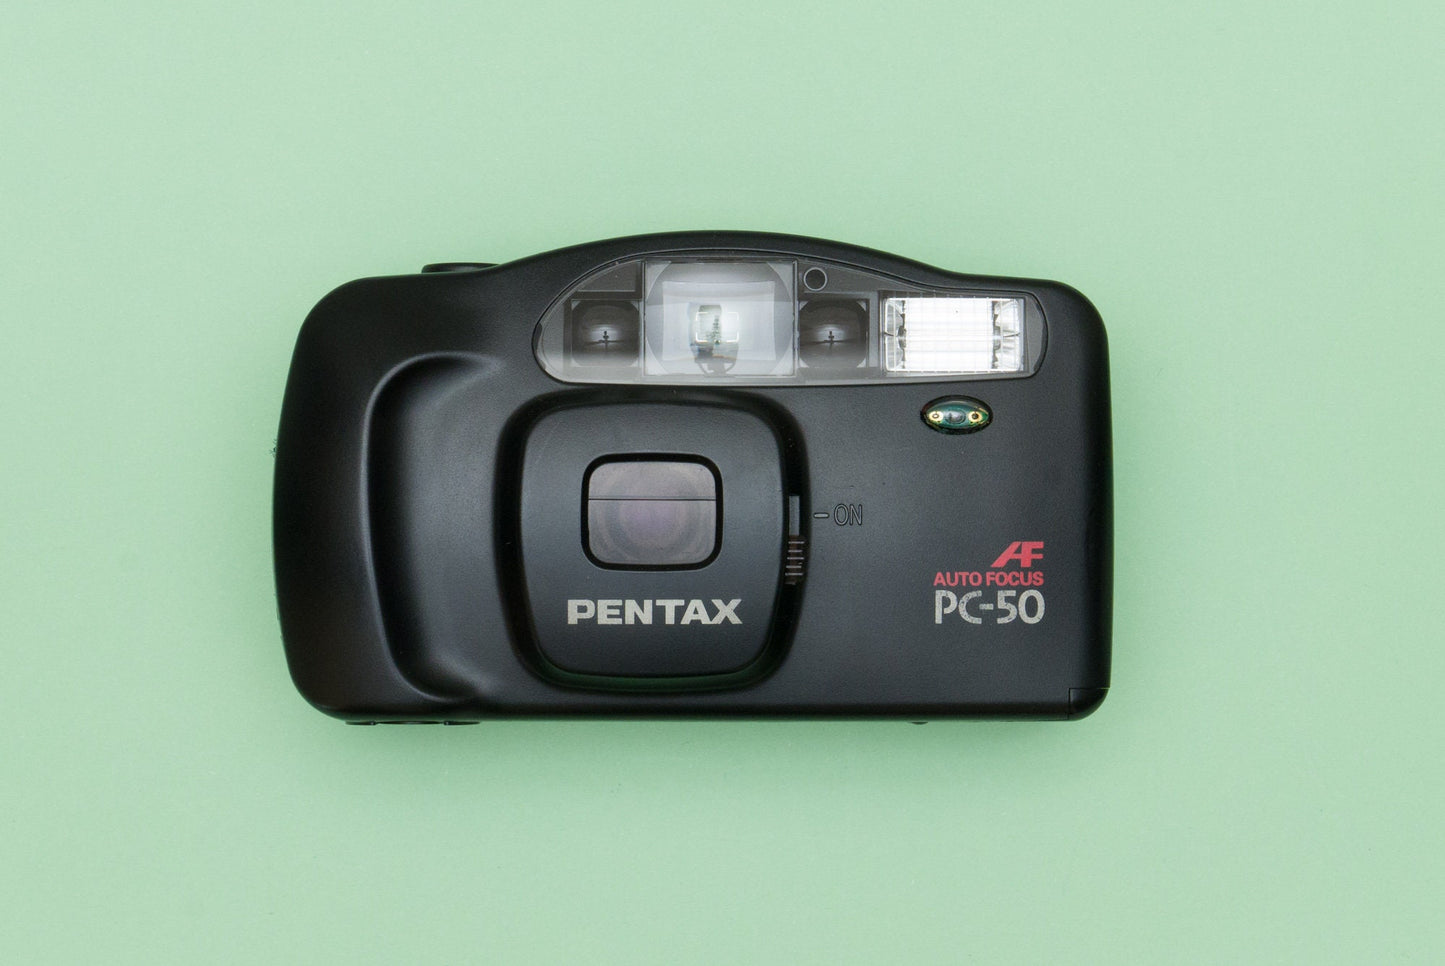 Pentax PC-50 Point and Shoot Compact 35mm Film Camera